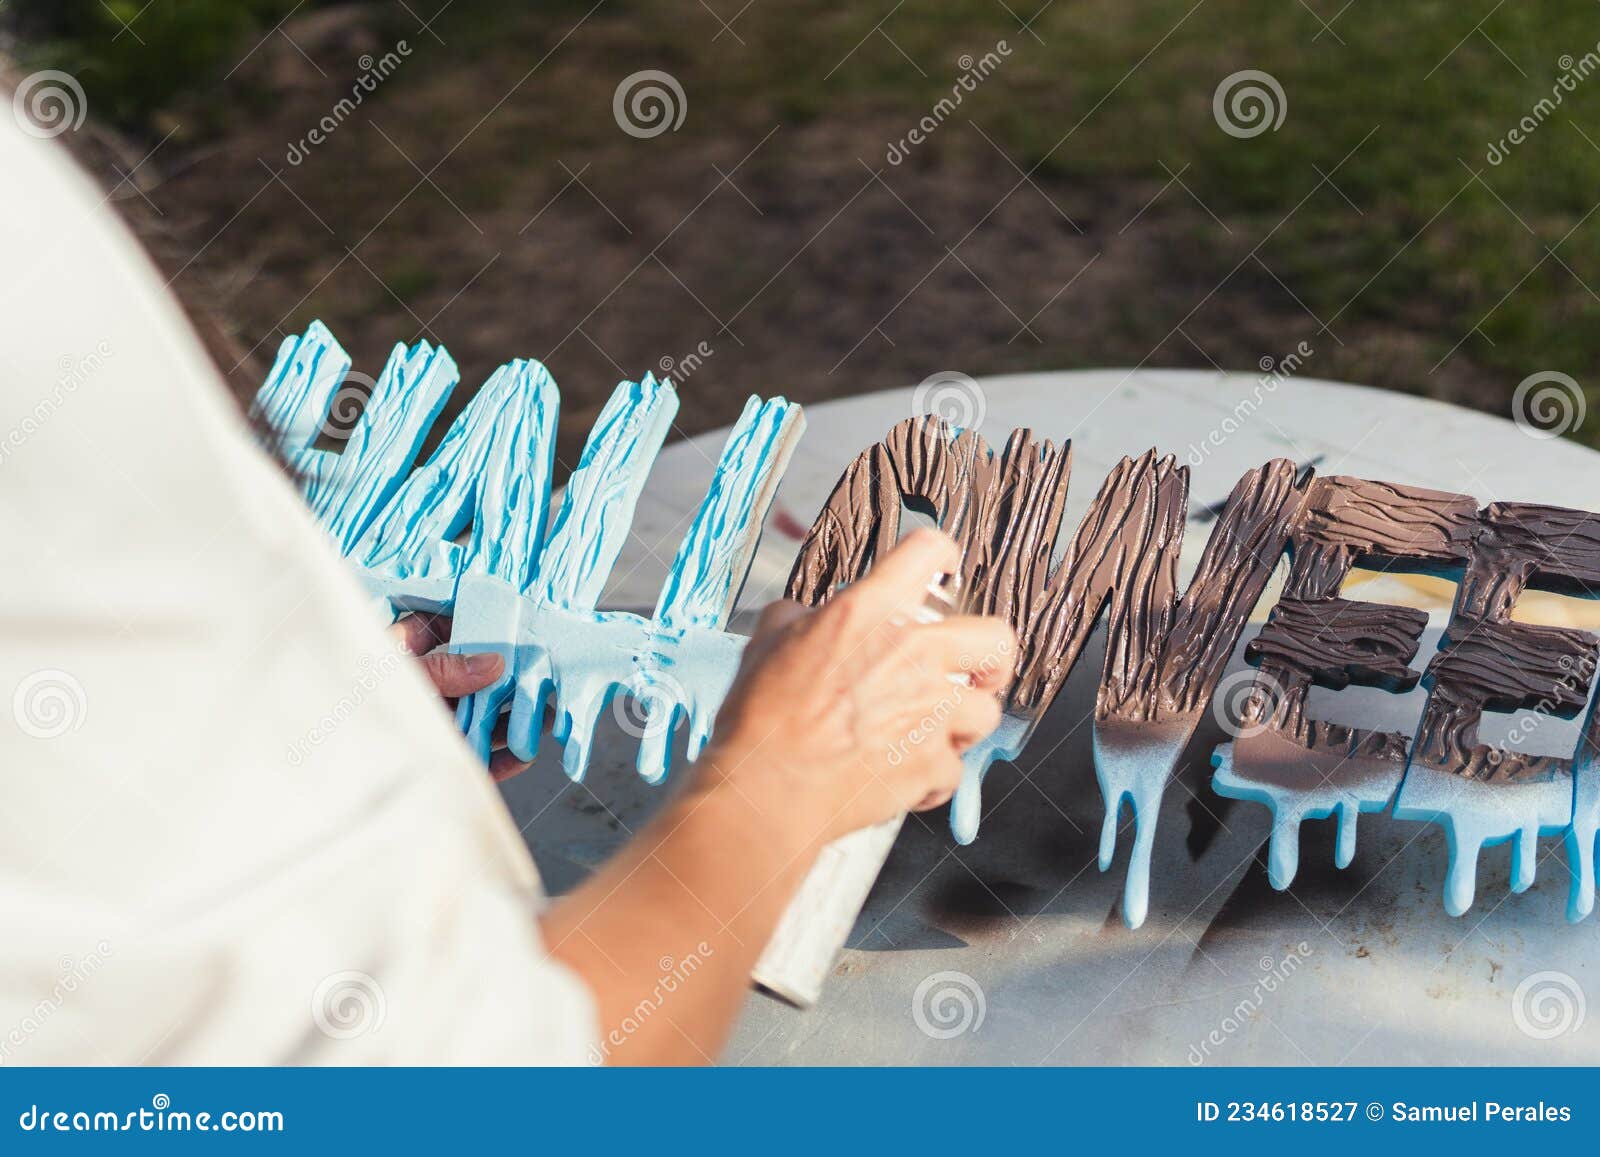 person painting polystyrene letters with brown paint in spray